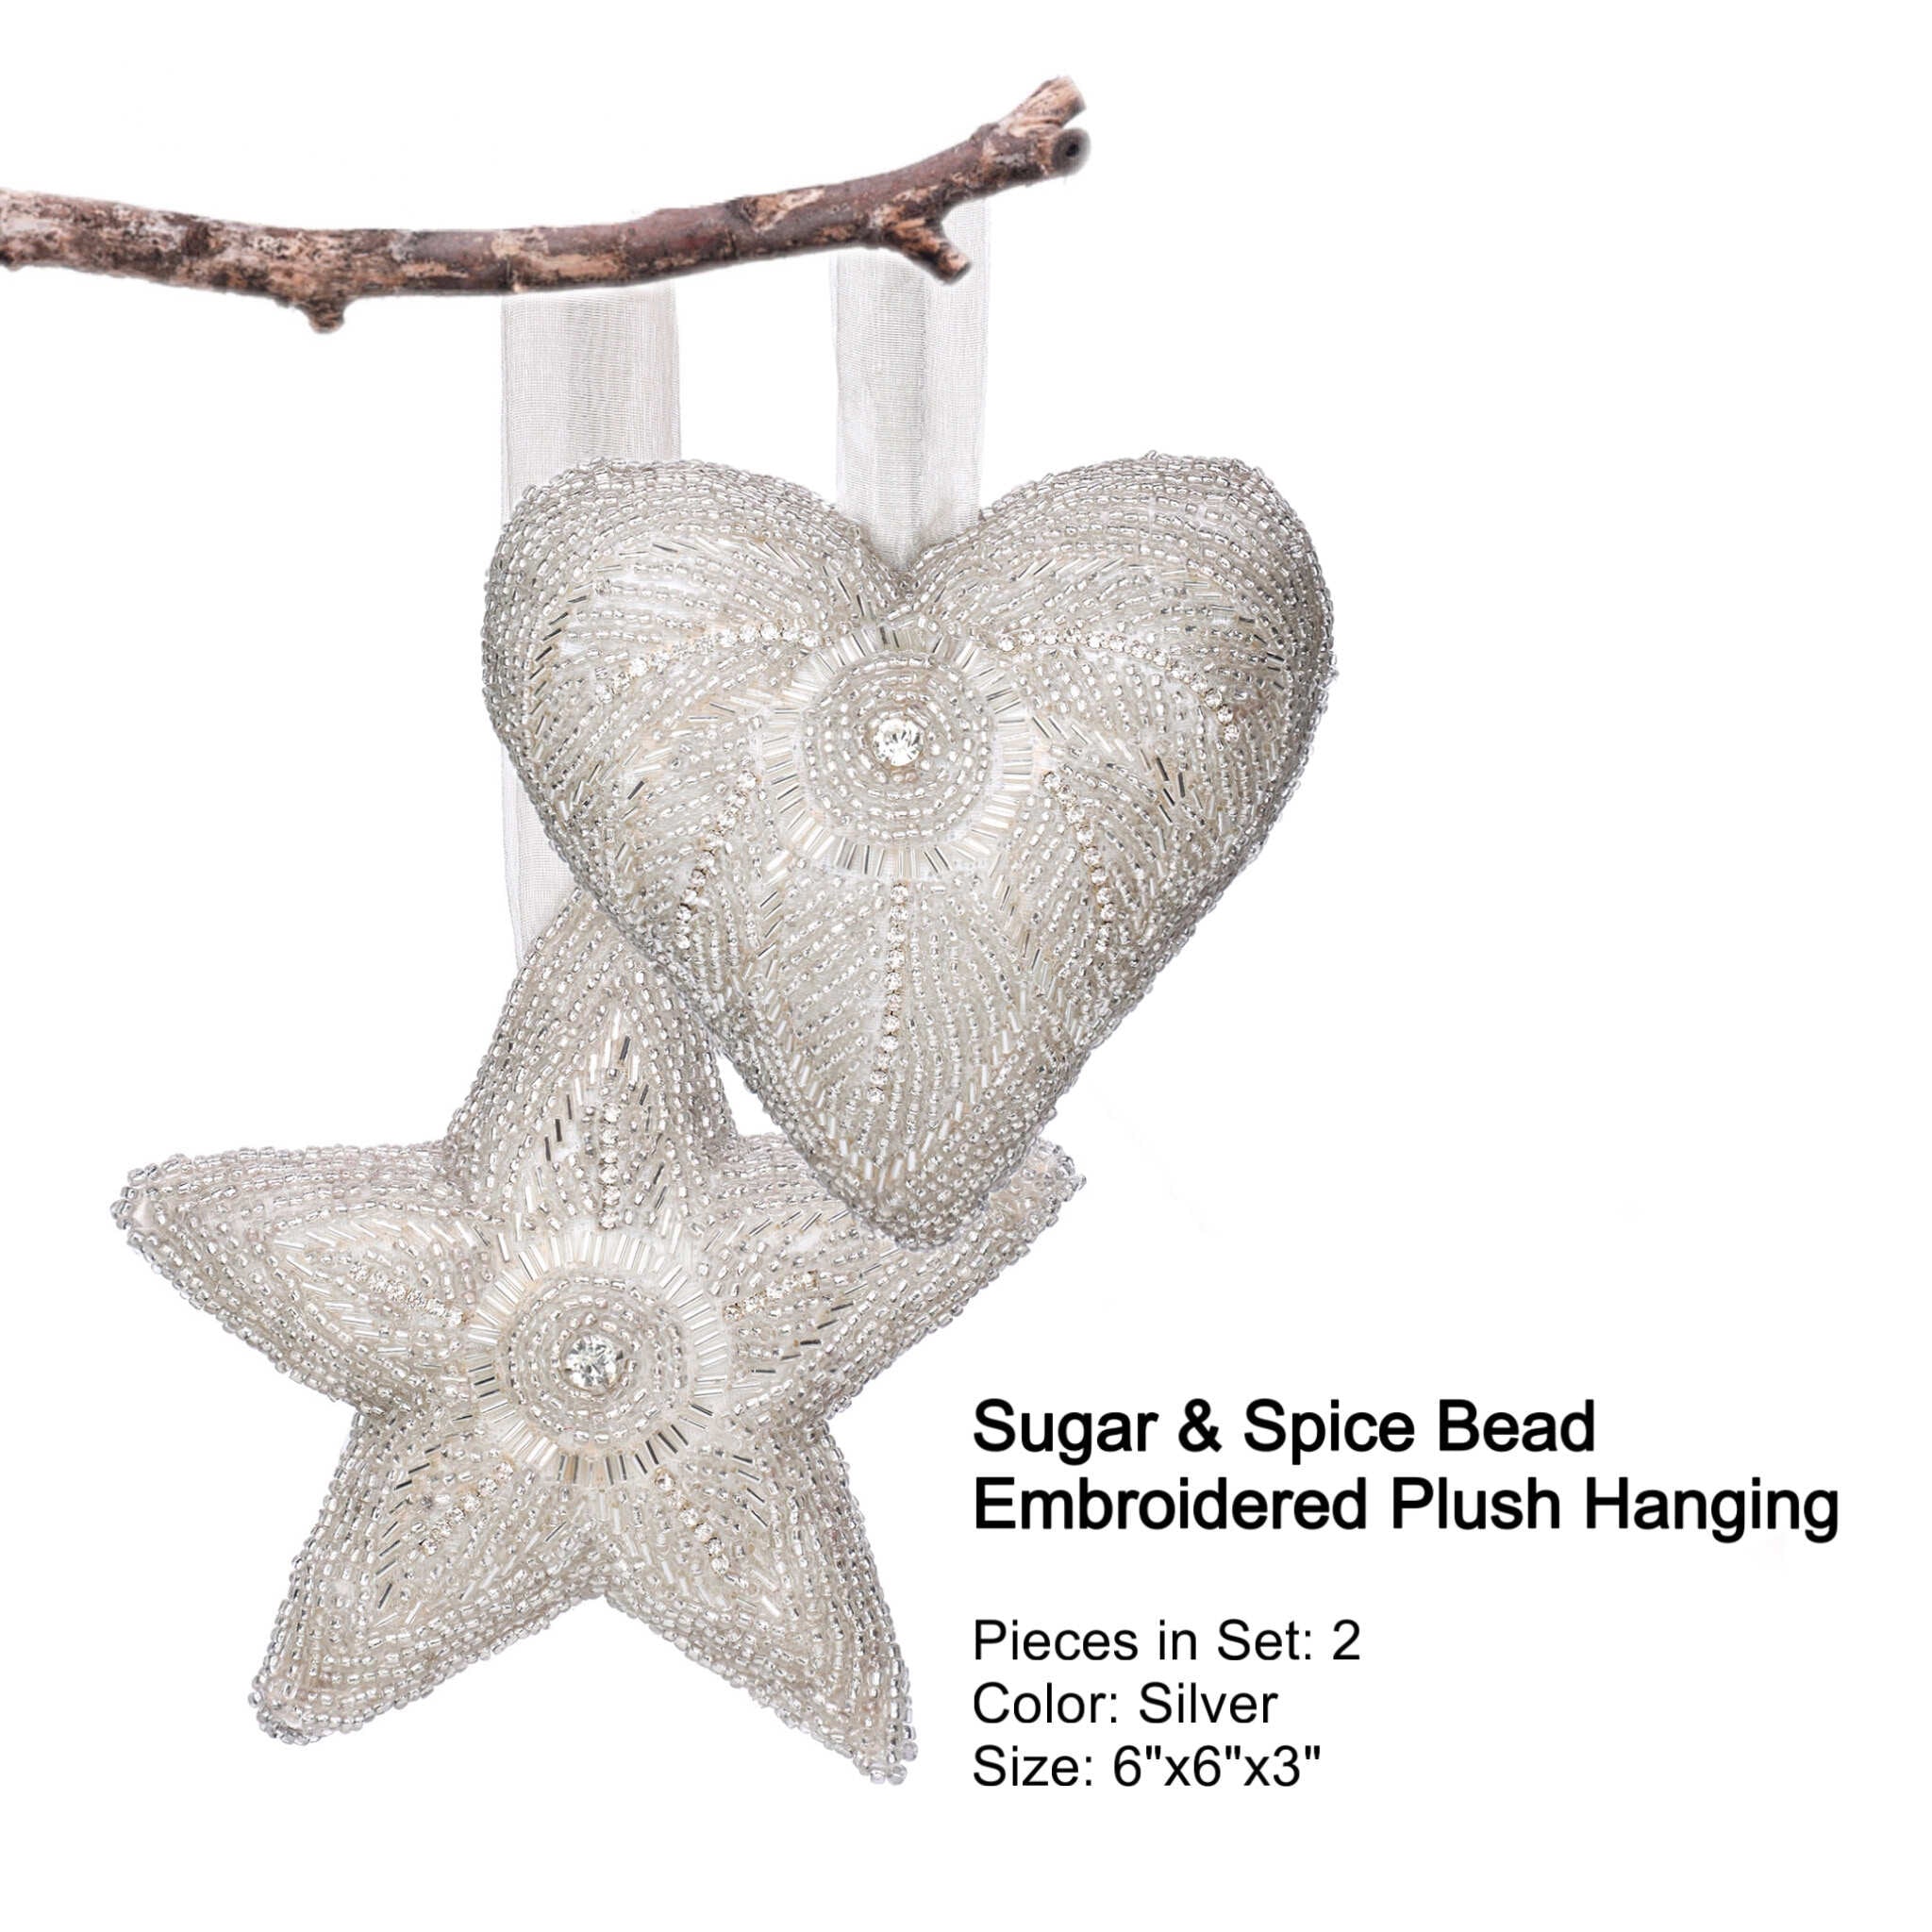 Sugar & Spice Bead Embroidered Plush Hanging in Silver, Set of 2